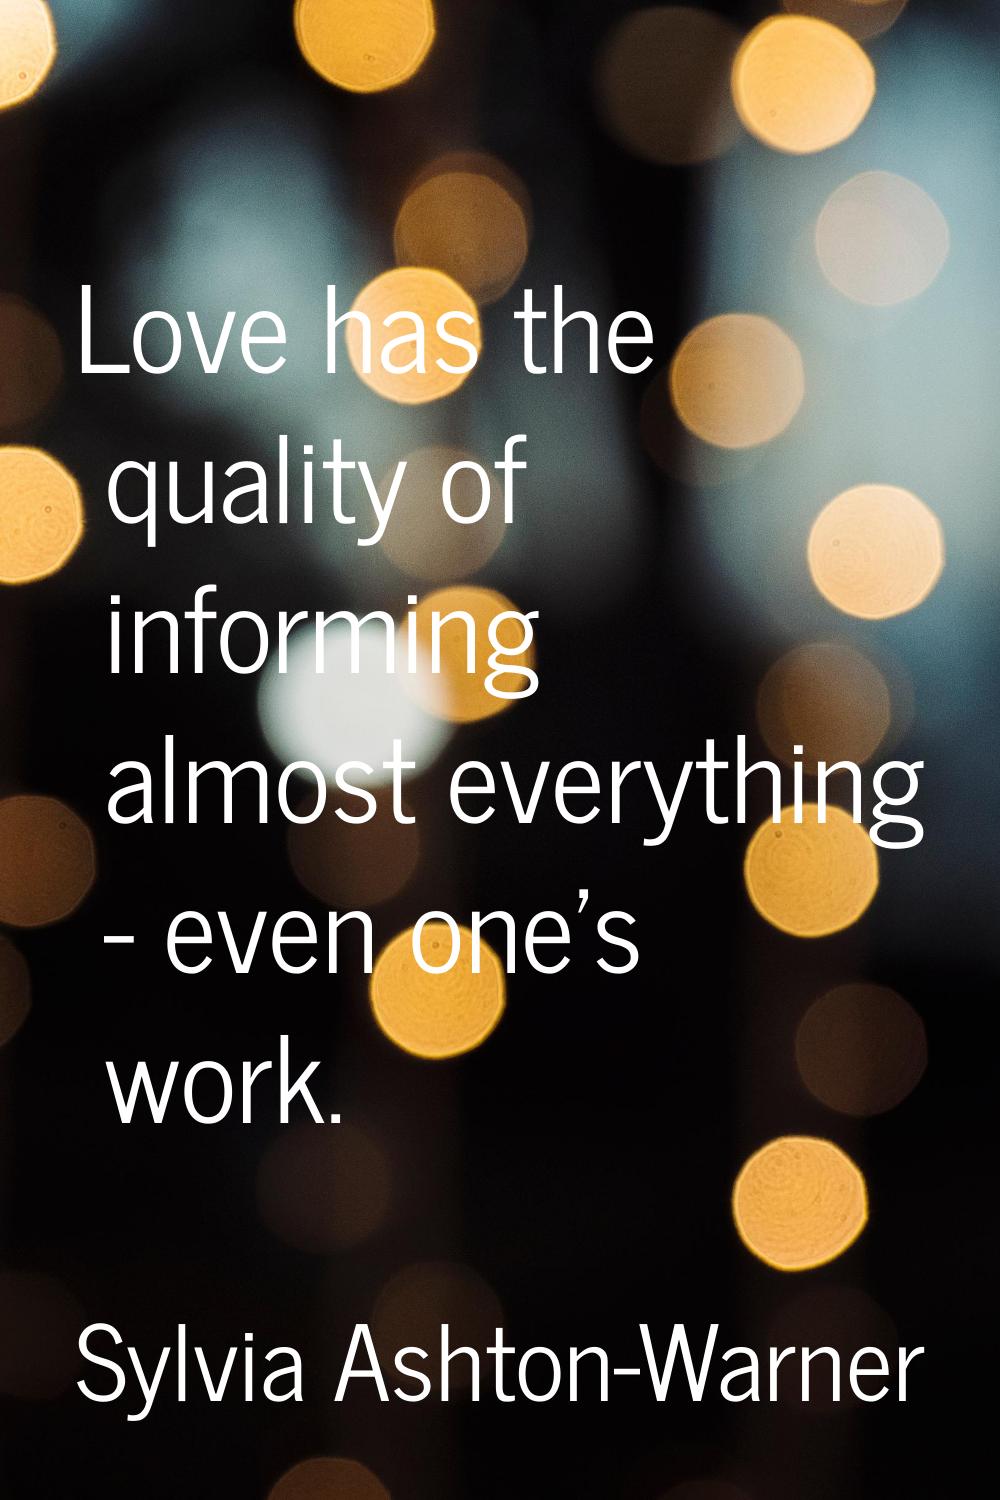 Love has the quality of informing almost everything - even one's work.